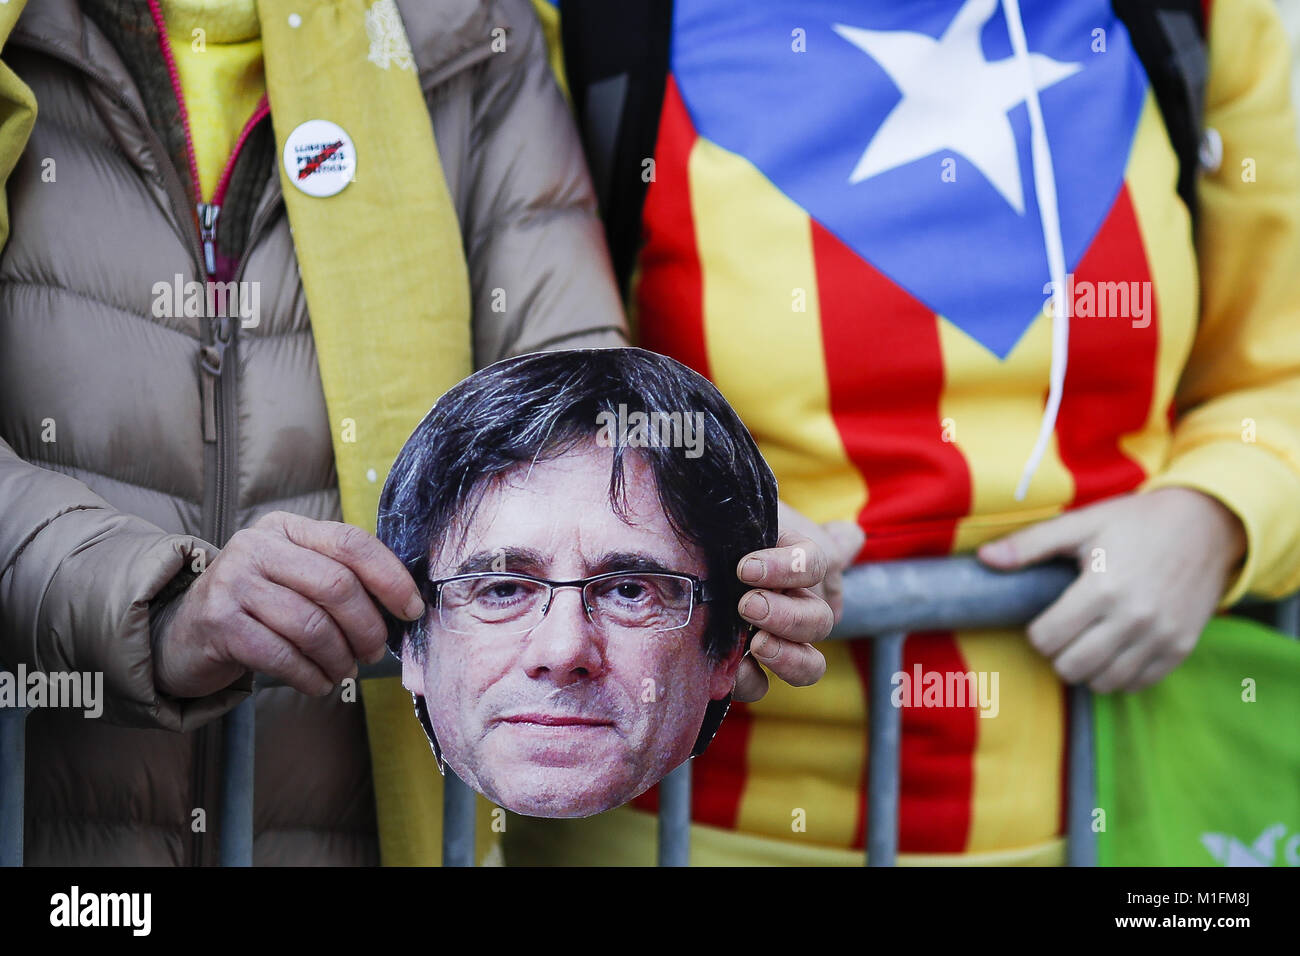 Barcelona, Catalonia, Spain. 30th Jan, 2018. January 30, 2017 - Barcelona, Spain - Catalan Parliament investment; Carles Puigdemont mask in the parliament. Credit: Eric Alonso/ZUMA Wire/Alamy Live News Stock Photo